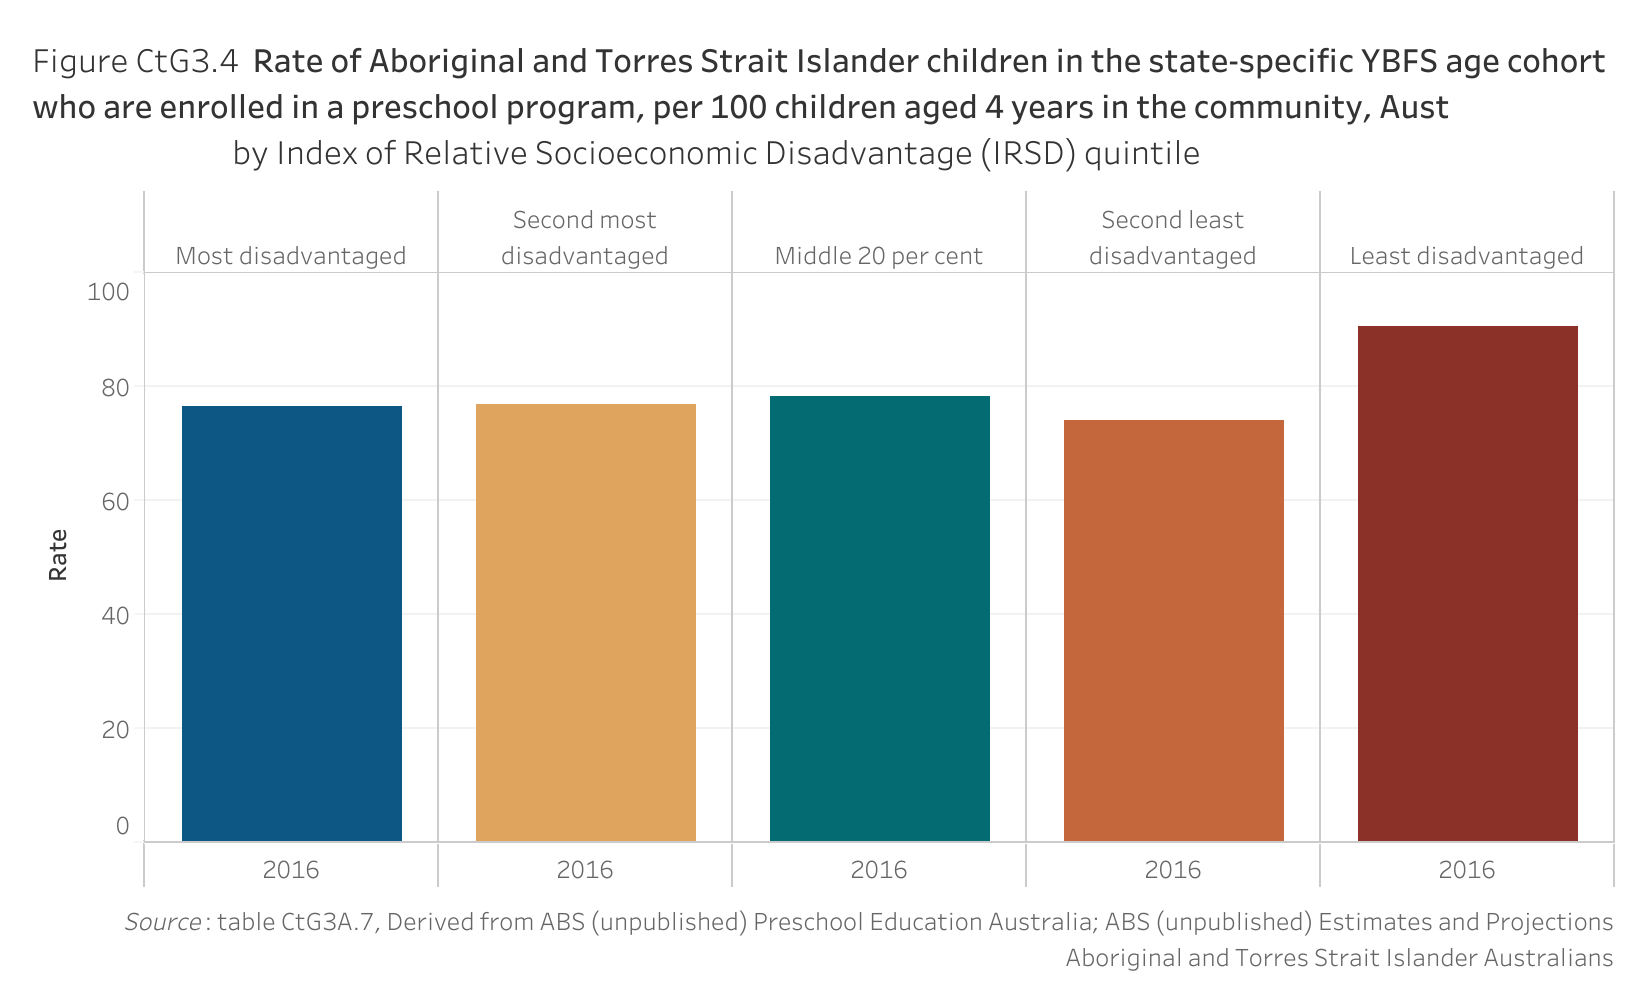 Figure CtG3.4. Bar chart showing the rate of Aboriginal and Torres Strait Islander children in the state-specific Year Before Full-time Schooling (YBFS) age cohort who are enrolled in a preschool program per 100 children aged 4 years in Australia, by Index of Relative Socioeconomic Disadvantage (IRSD) quintile and by year. Data table of figure CtG3.4 is below.